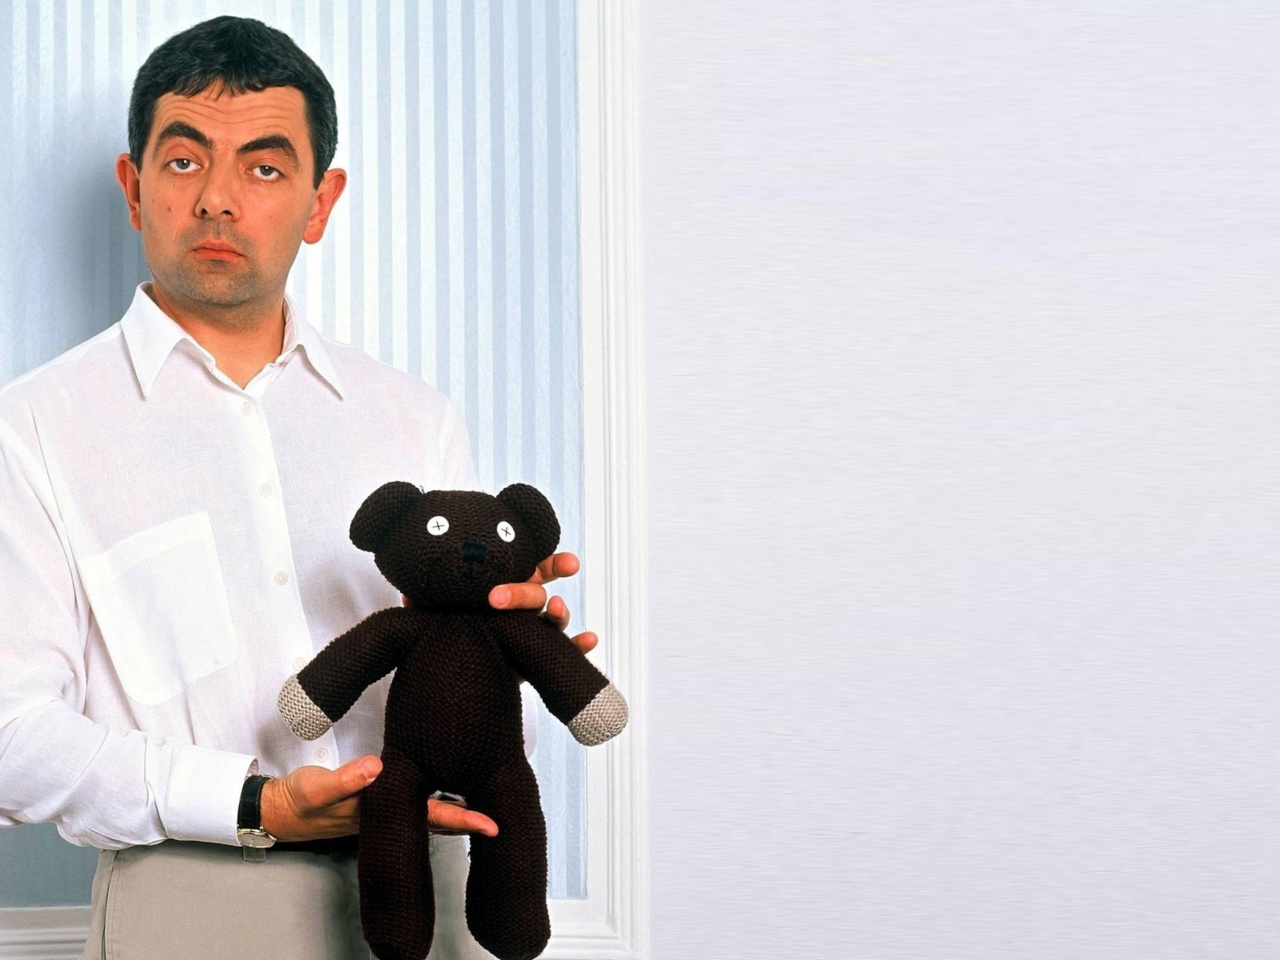 Mr Bean with Knitted Brown Teddy Bear wallpaper 1280x960